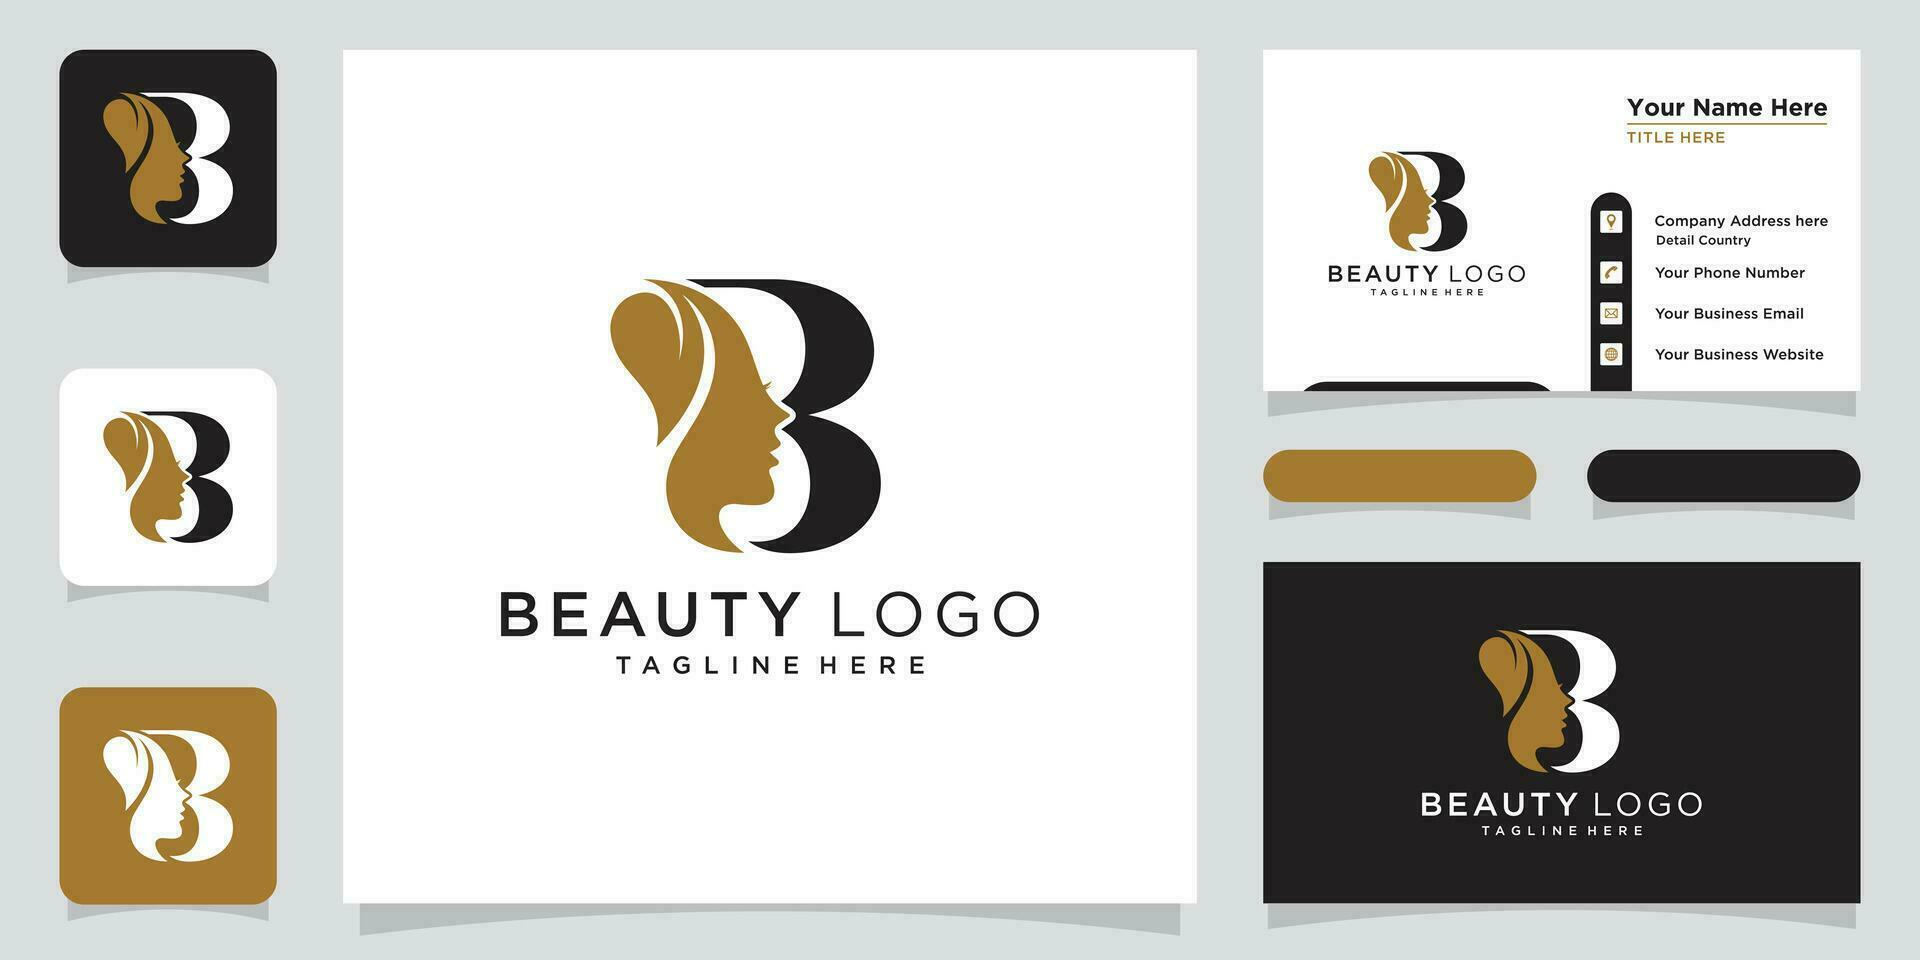 Creative letter B logo with Beauty logo style and business card design template Premium Vector